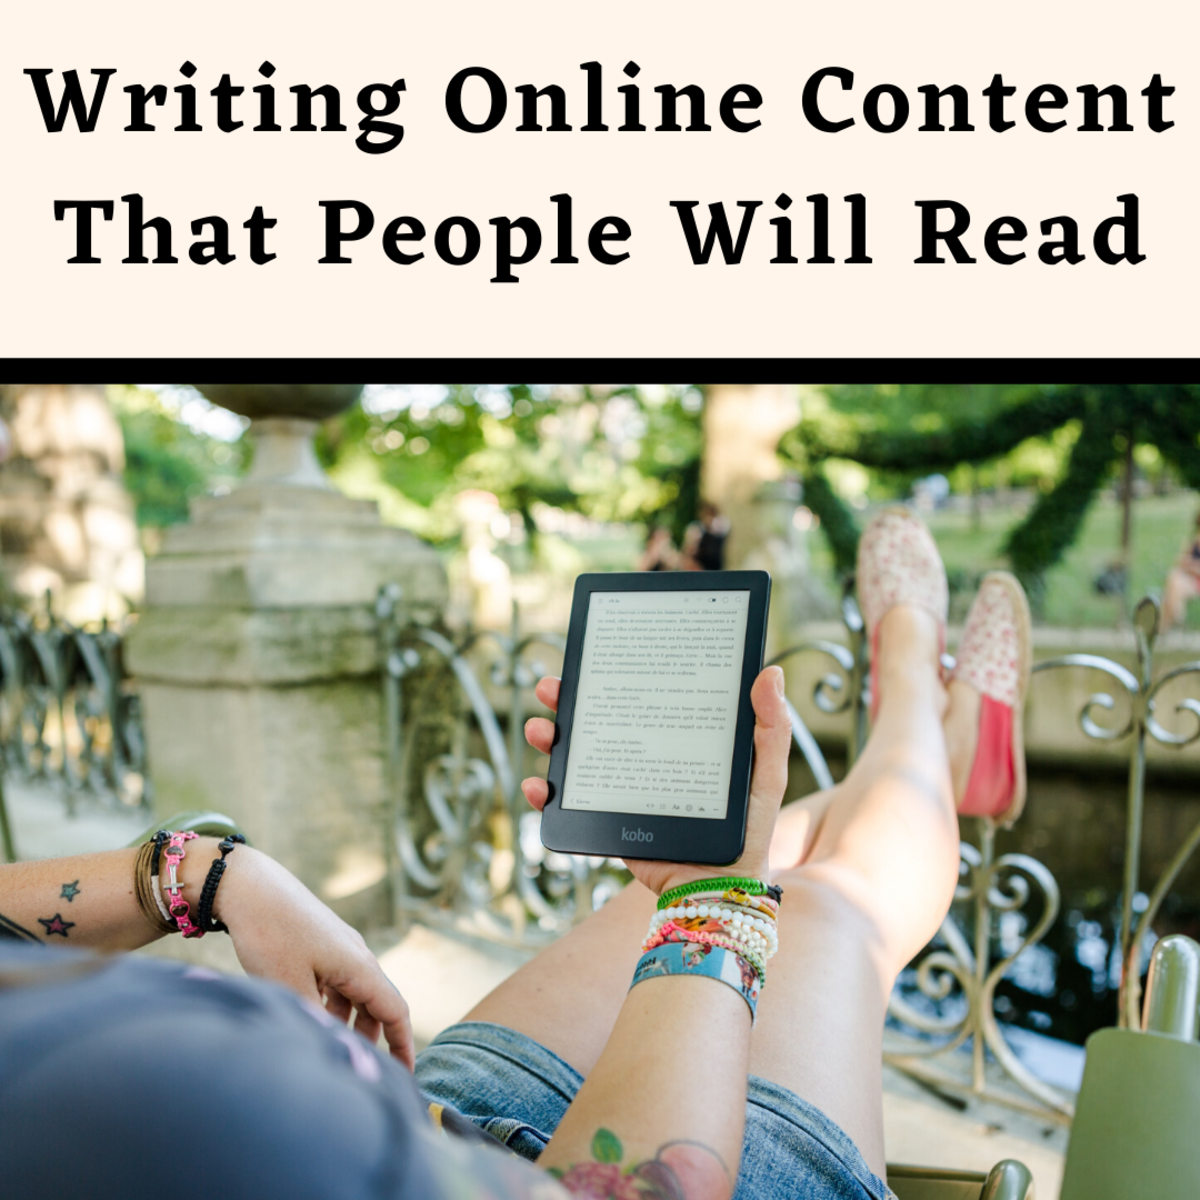 Learn how to hook readers and build an online audience. 